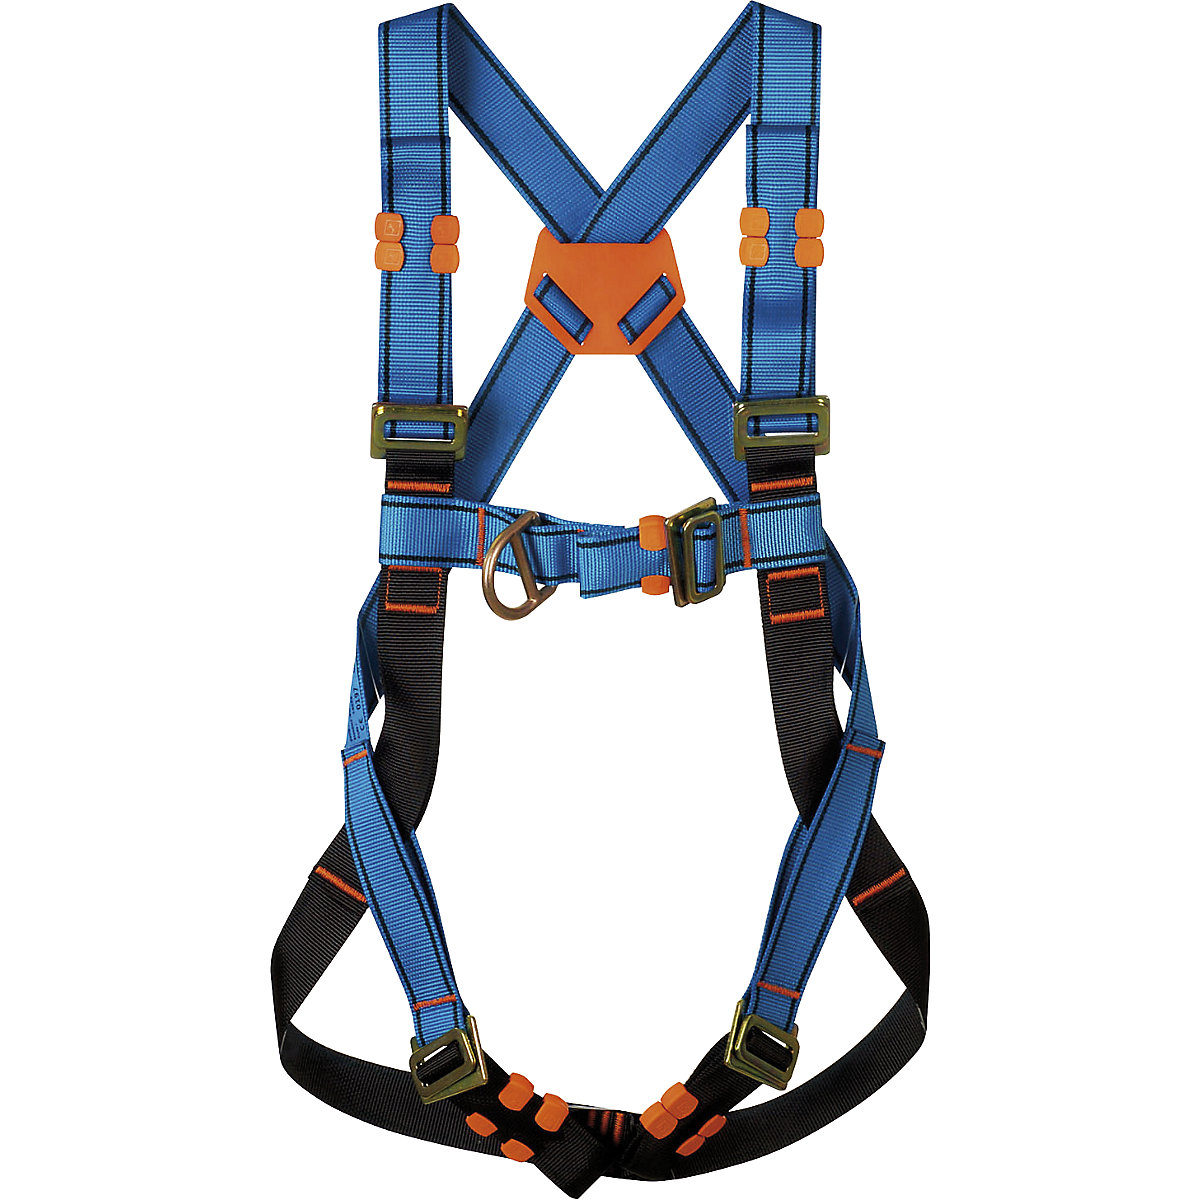 HT 22 safety harness